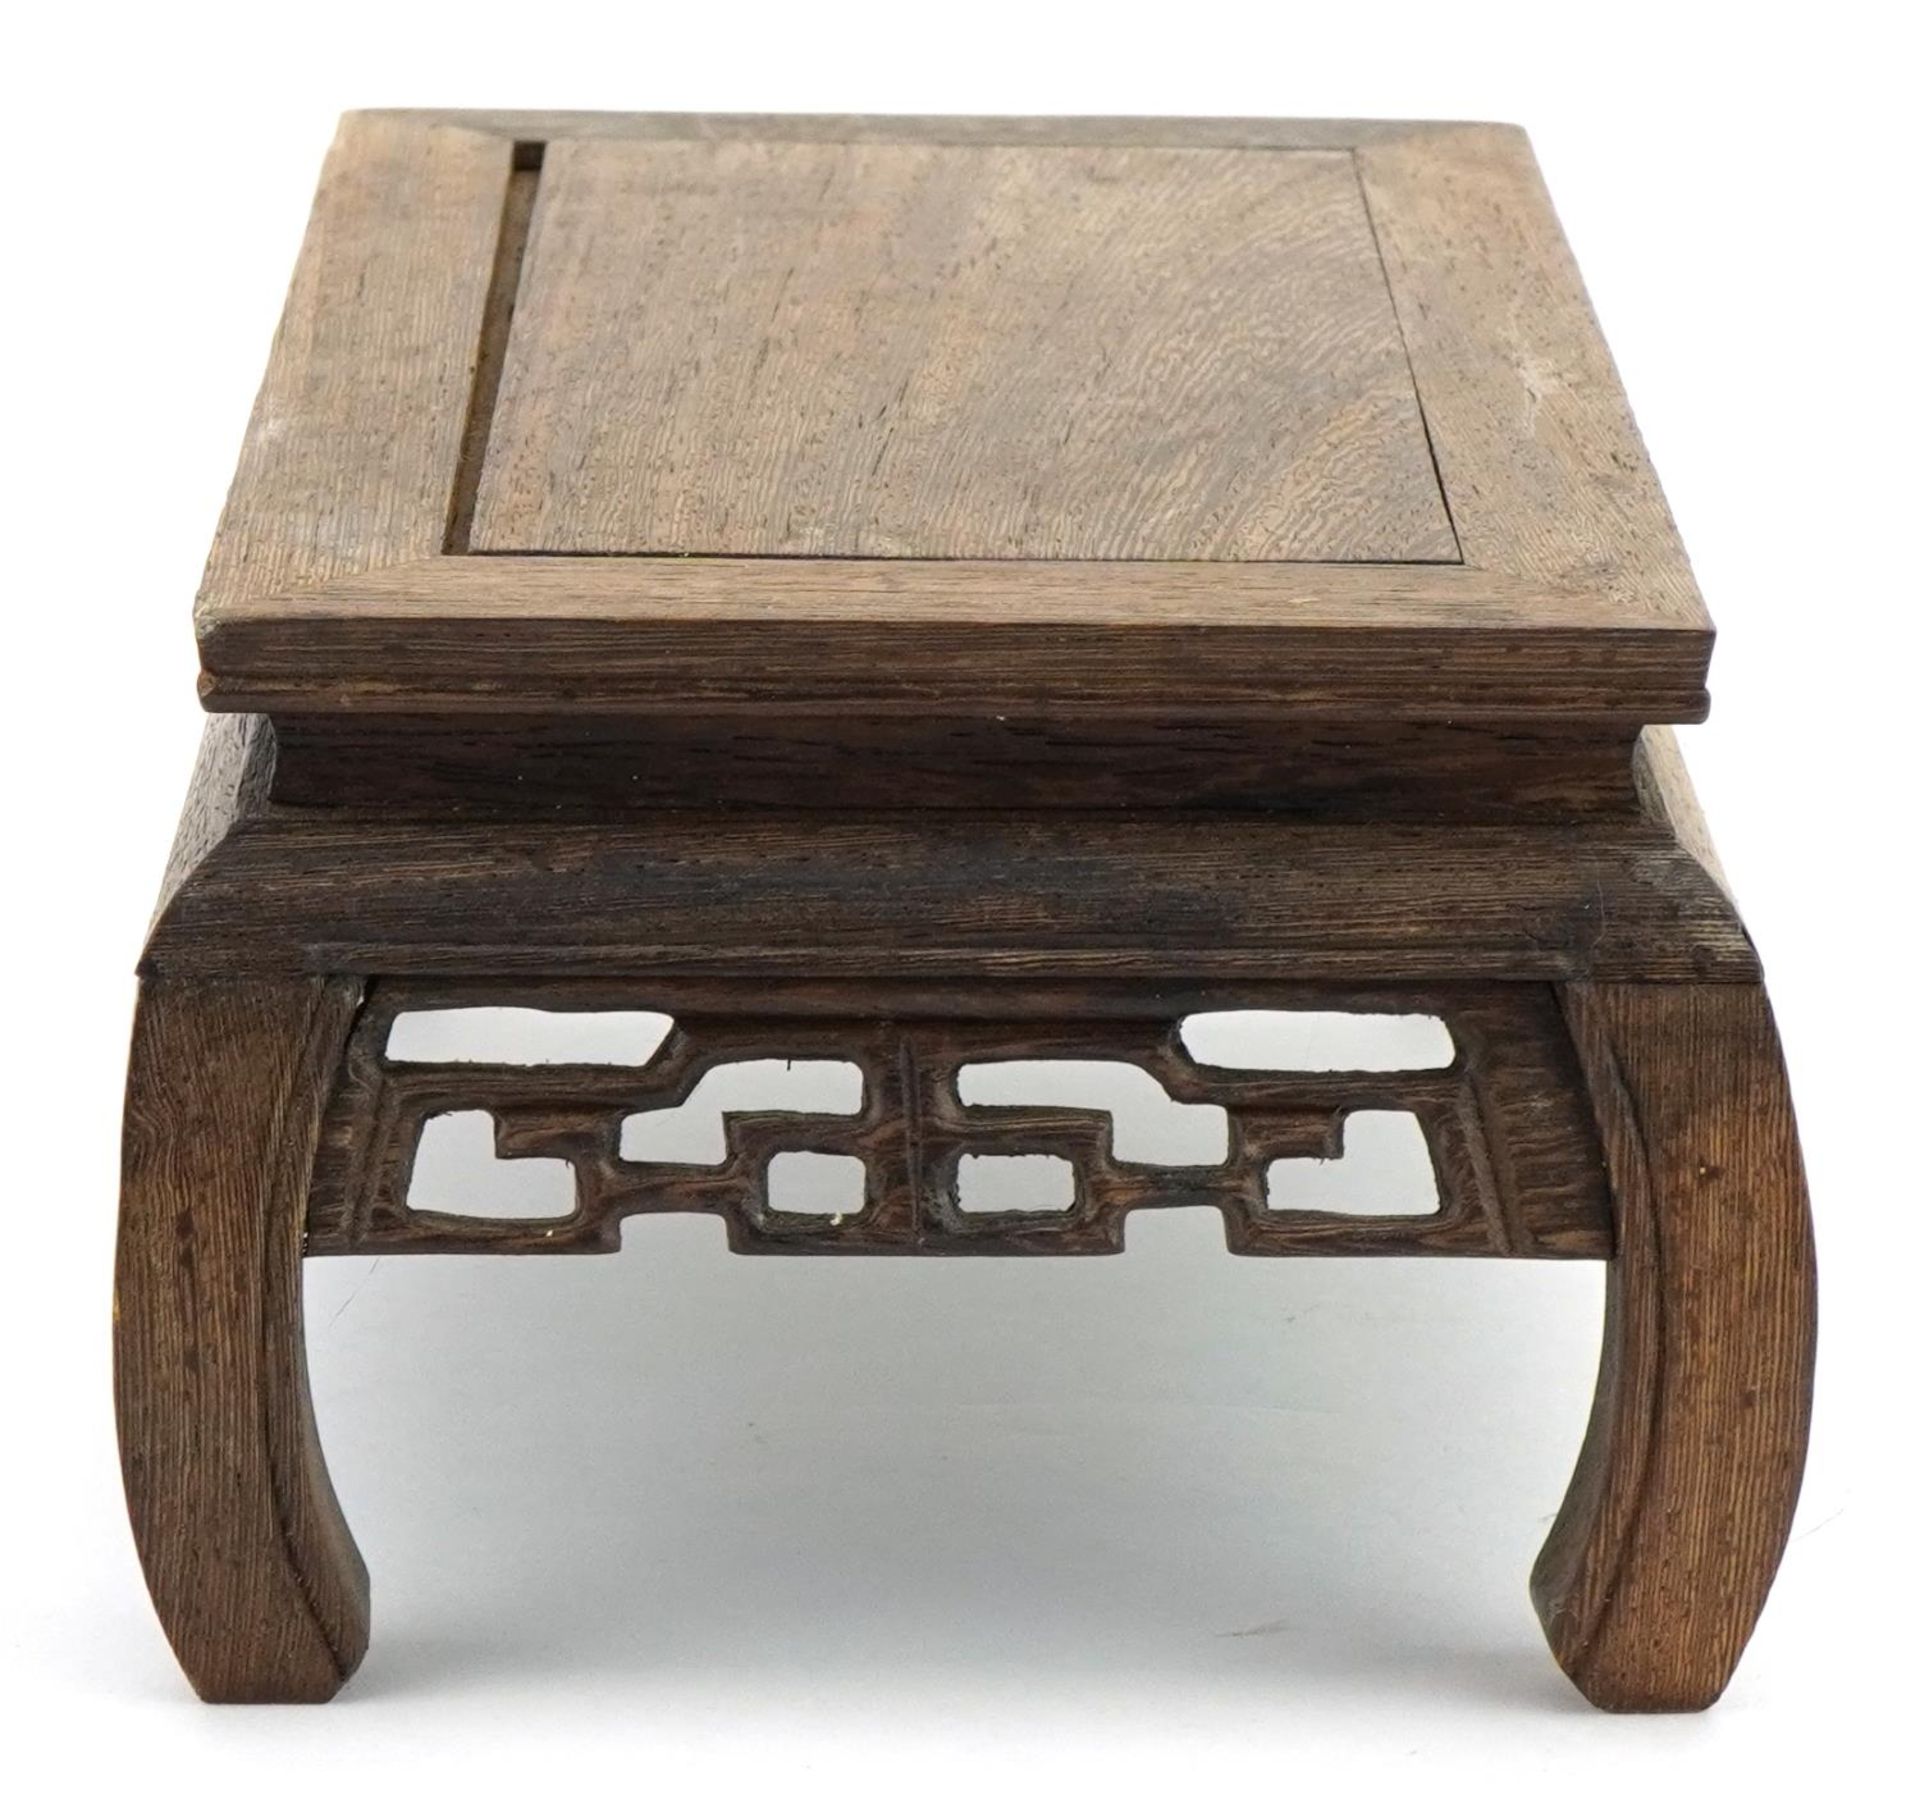 Chinese carved hardwood stand, 9.5cm H x 23.5cm W x 14.5cm D - Image 5 of 14